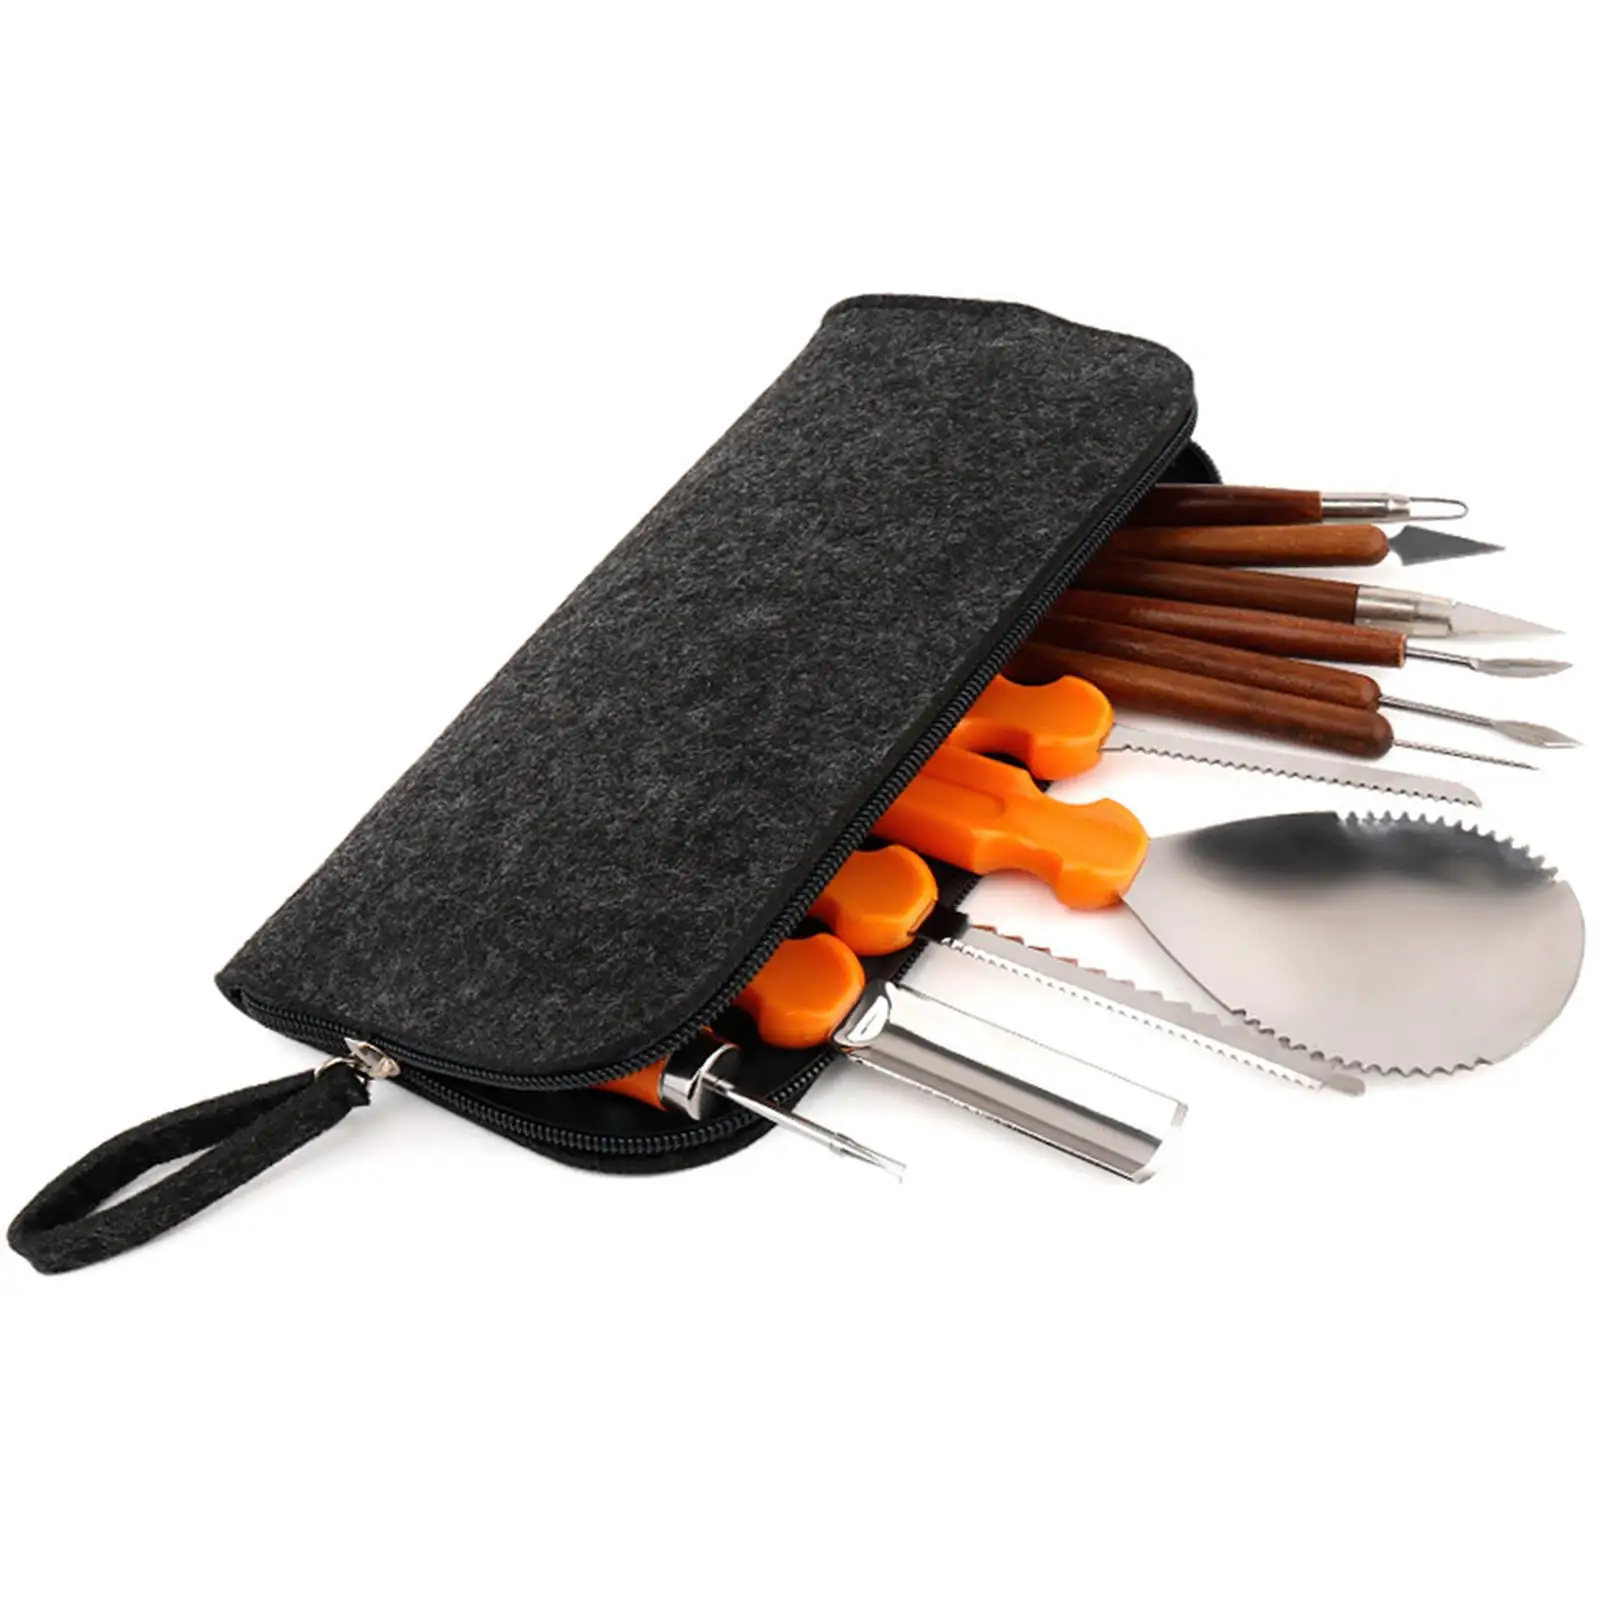 Portable Carving Hand Tool Bag Storage Pouch Organizer Zipper with Handle Tote Handbag Case for Wrench Wood Working Electricians